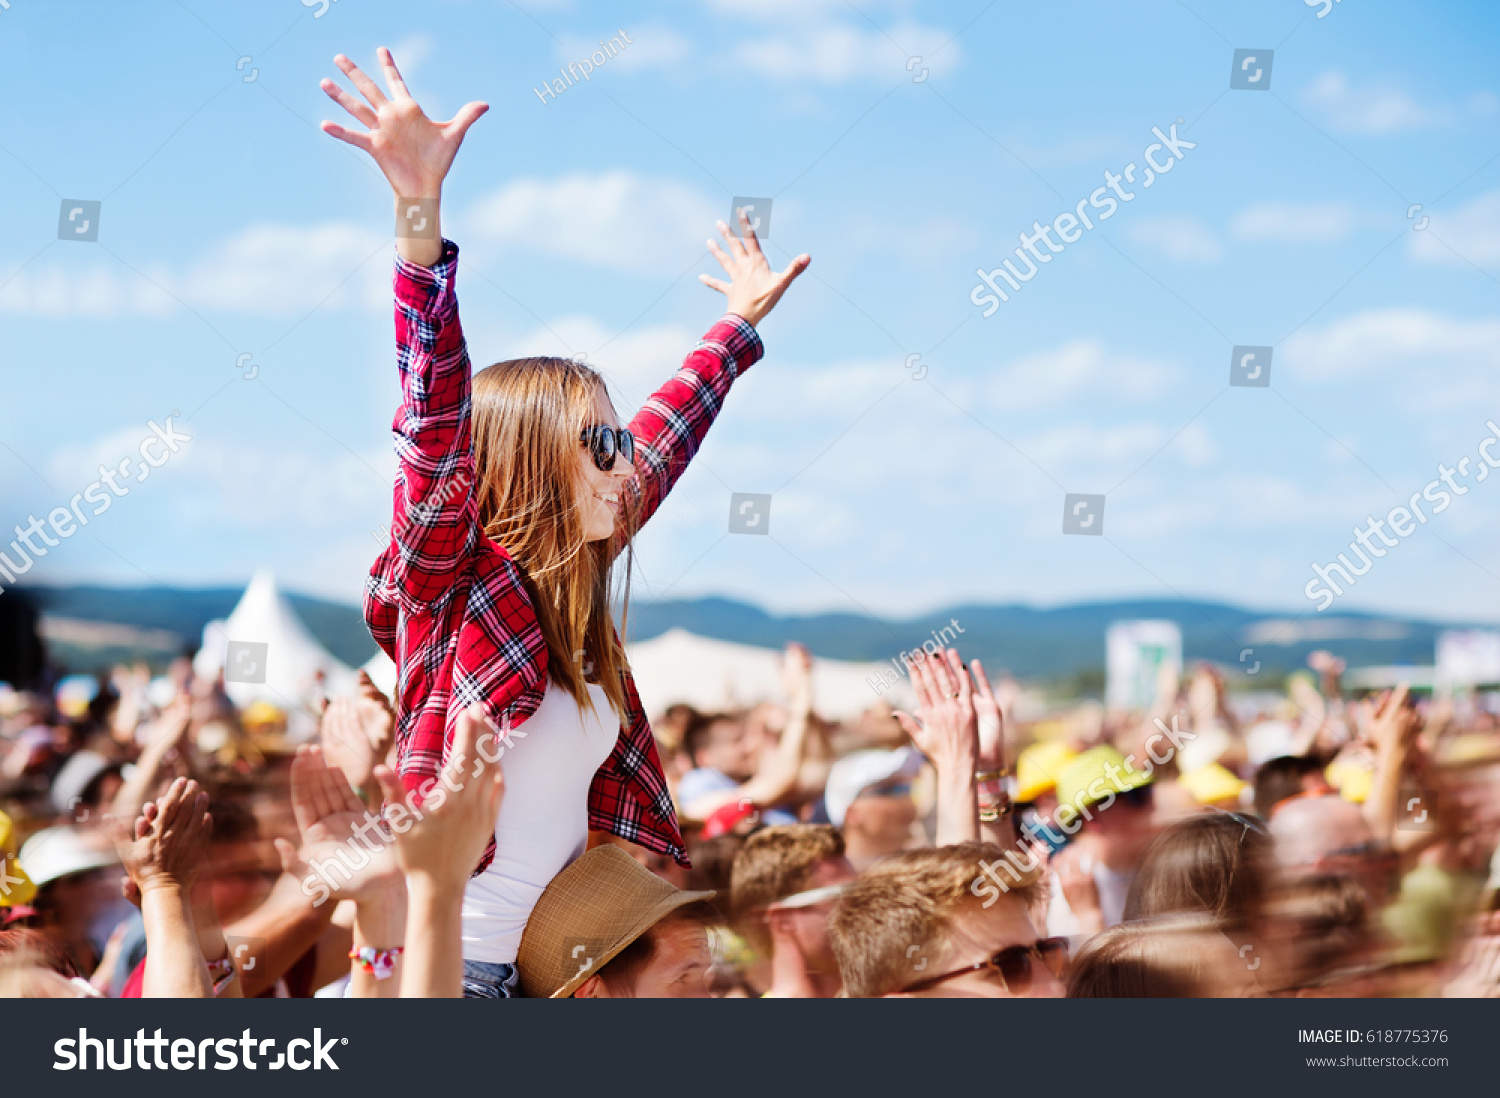 Teenagers at summer music festival enjoying themselves #618775376